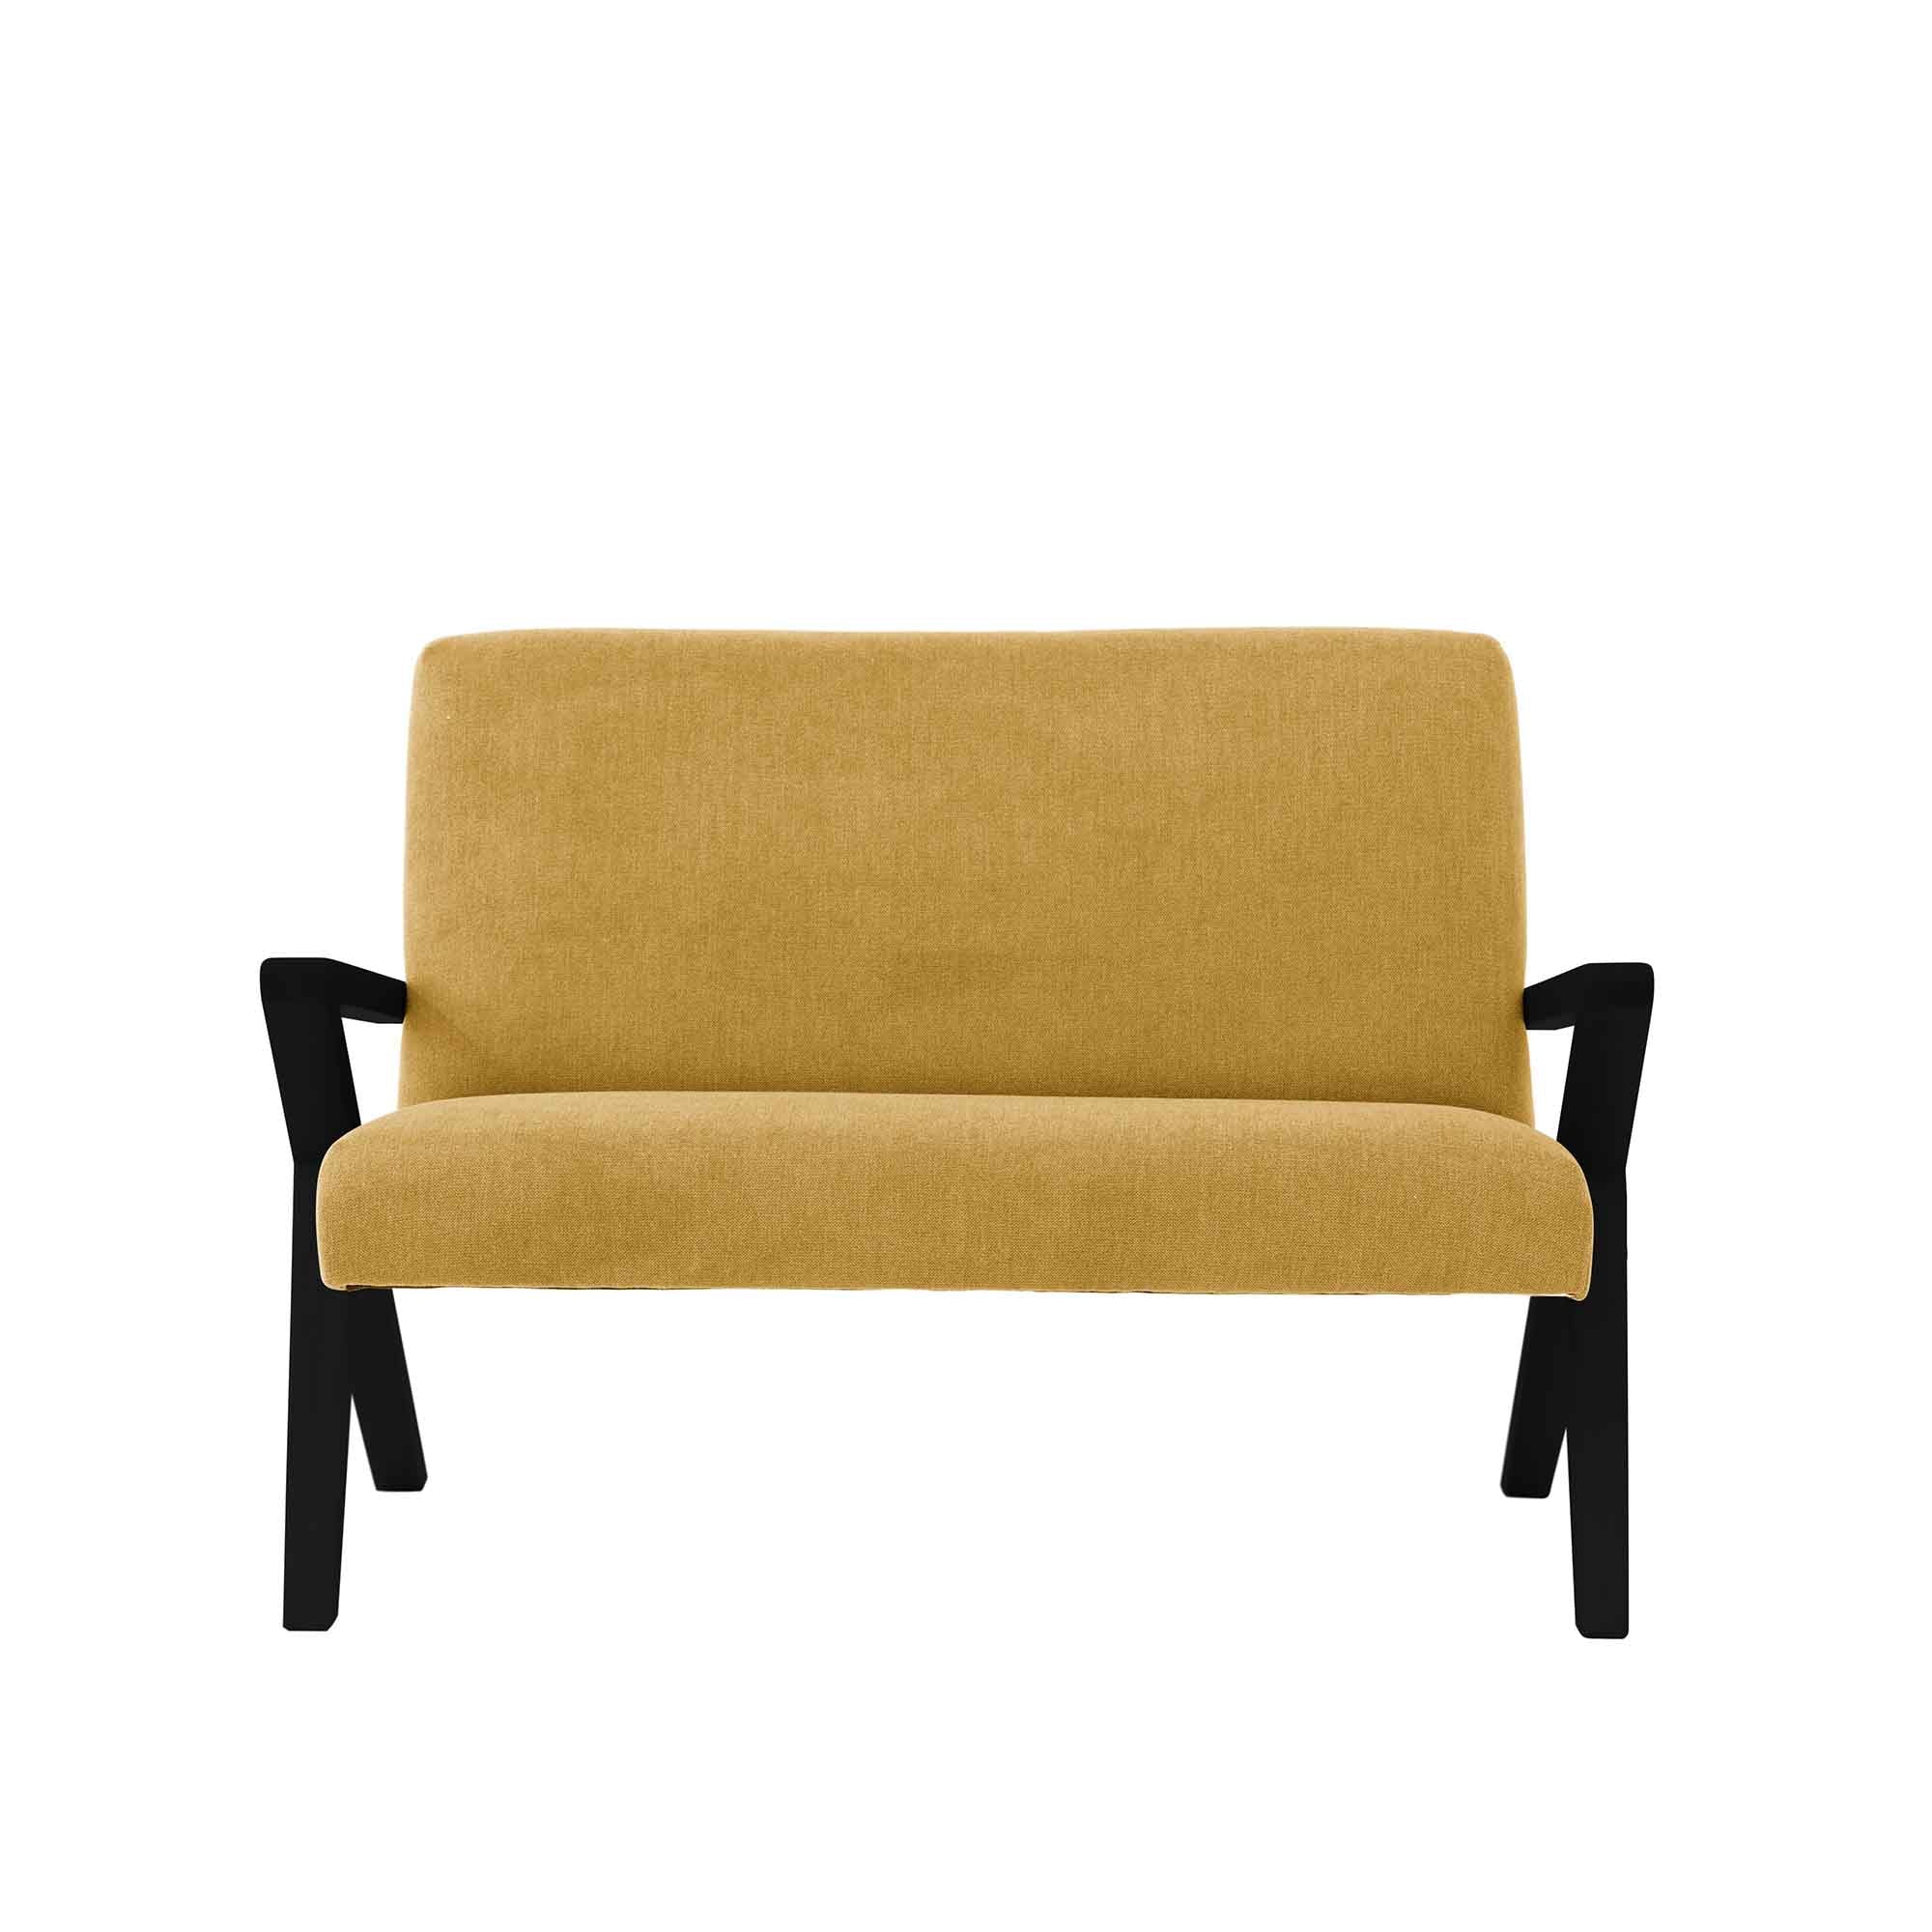  2-Seater Sofa, Beech Wood Frame, Black Lacquered yellow fabric, front view